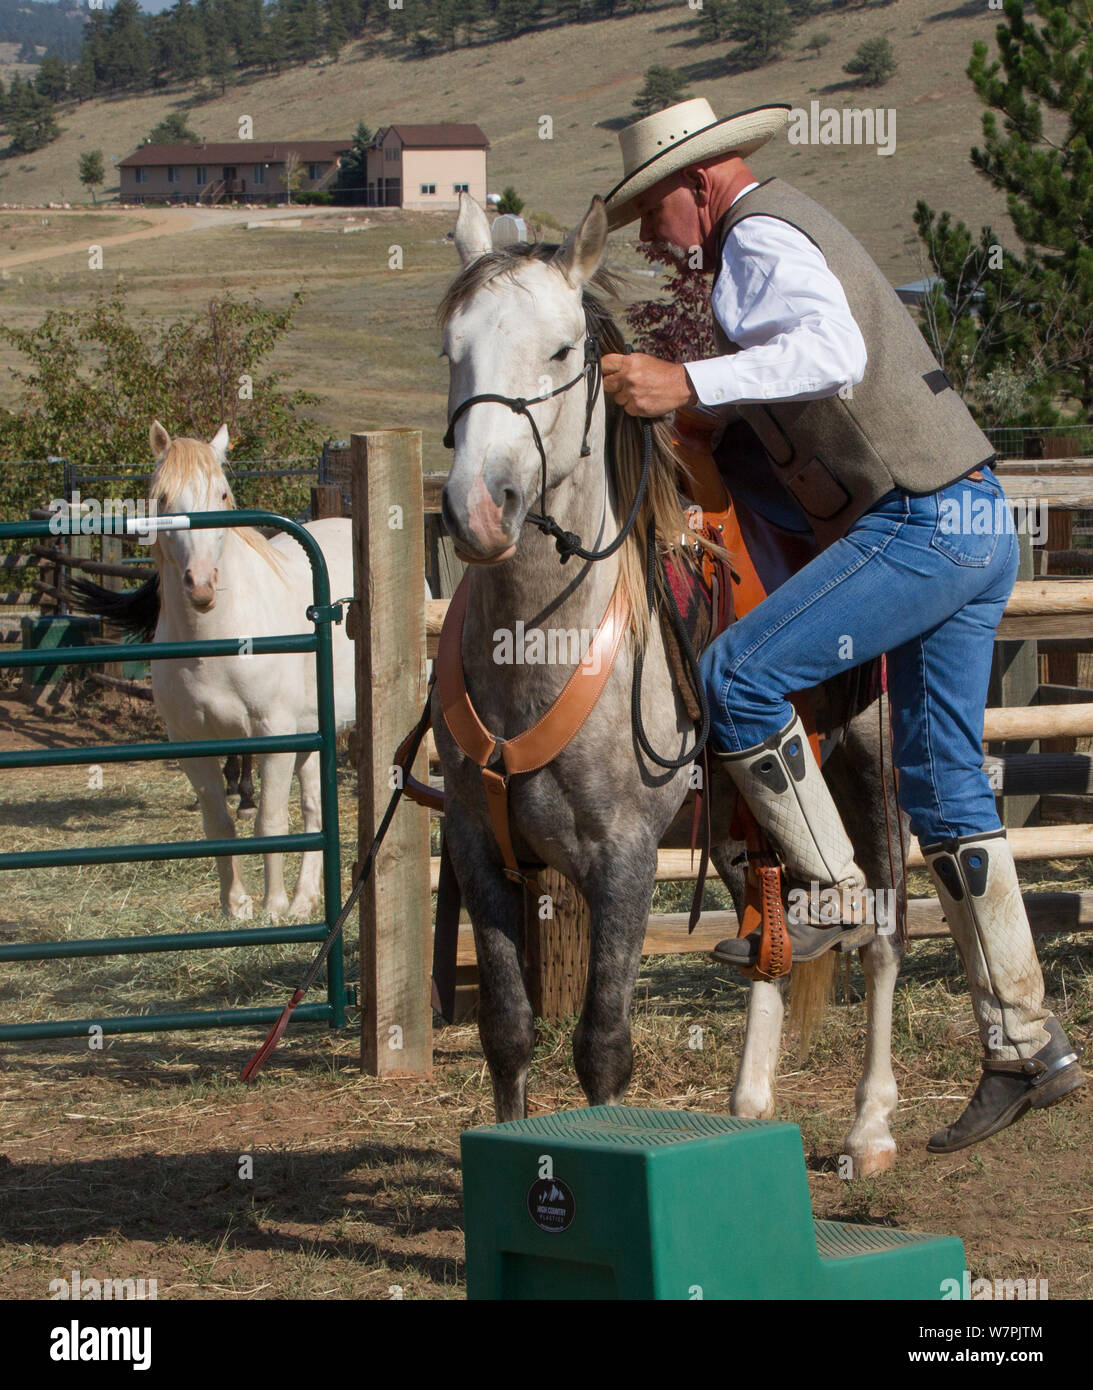 Wild horse / mustang called Mica, rounded up from Adobe Town Herd Management Area in Wyoming and adopted by photographer Carol Walker. With trainer Rich Scott, saddled and preparing to be ridden for the first time, Colorado, USA. Stock Photo